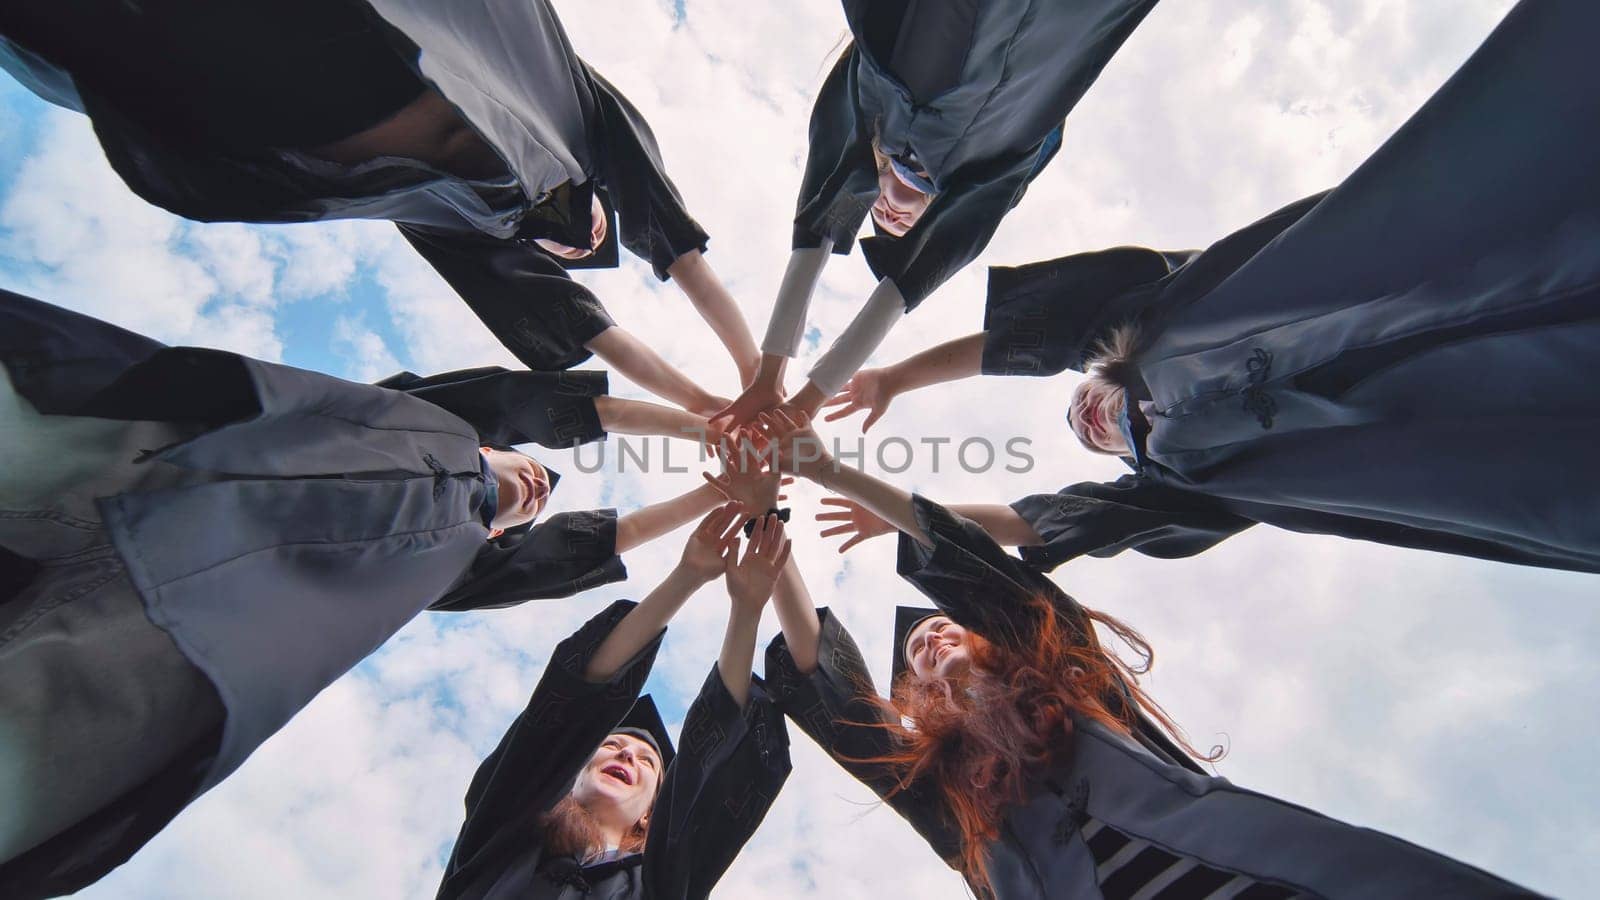 Team of college or university students celebrating graduation. Group of happy successful graduates in academic hats and robes standing in circle and putting their hands together